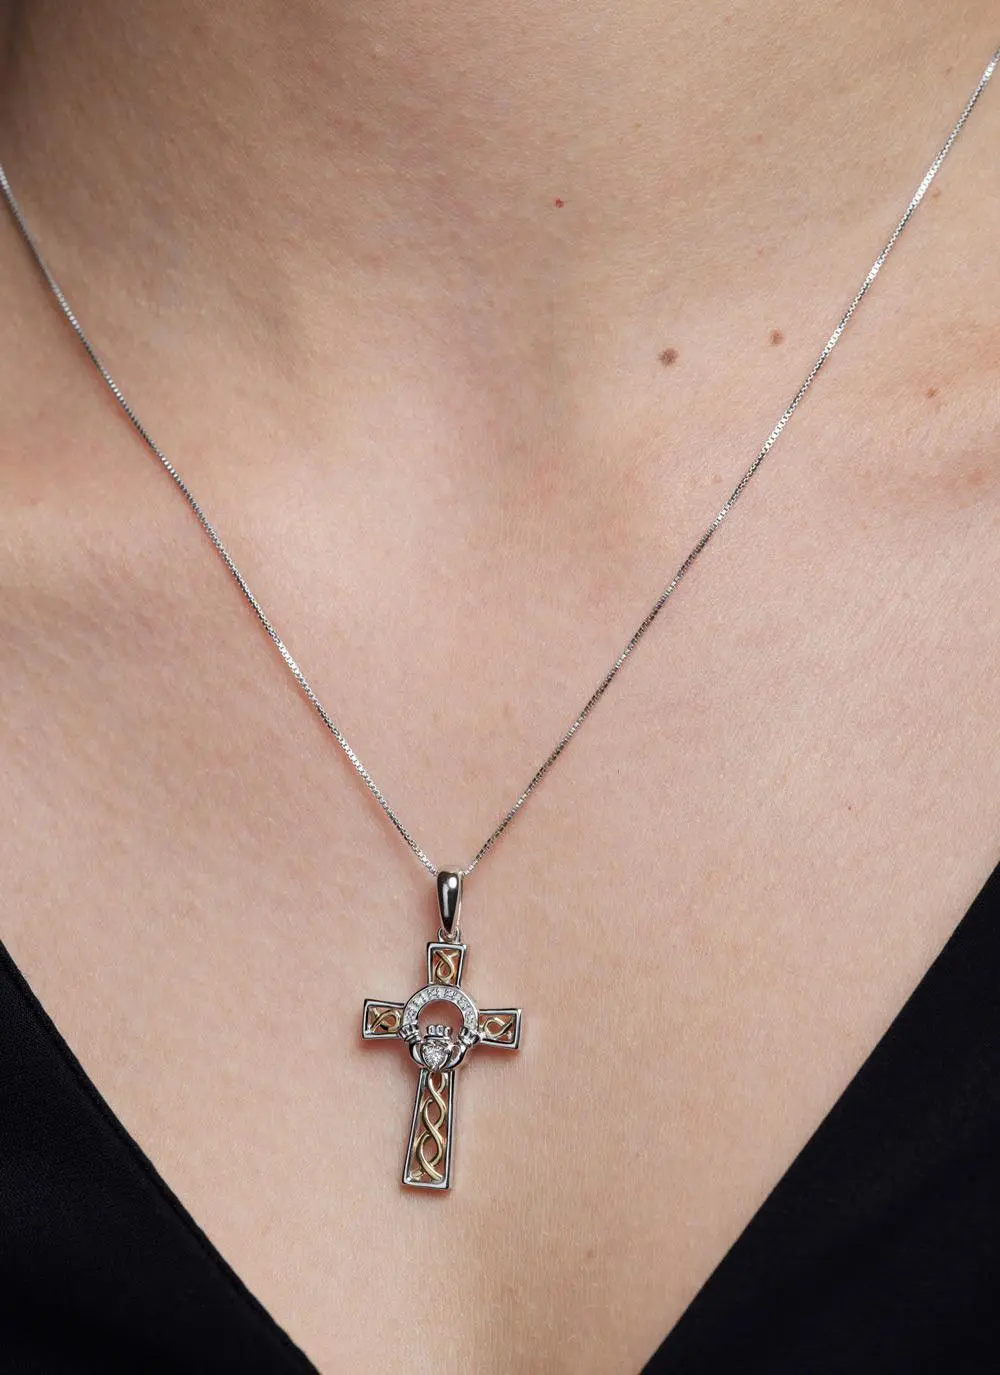 Claddagh Necklace - Cross Pendant Necklace In Gold